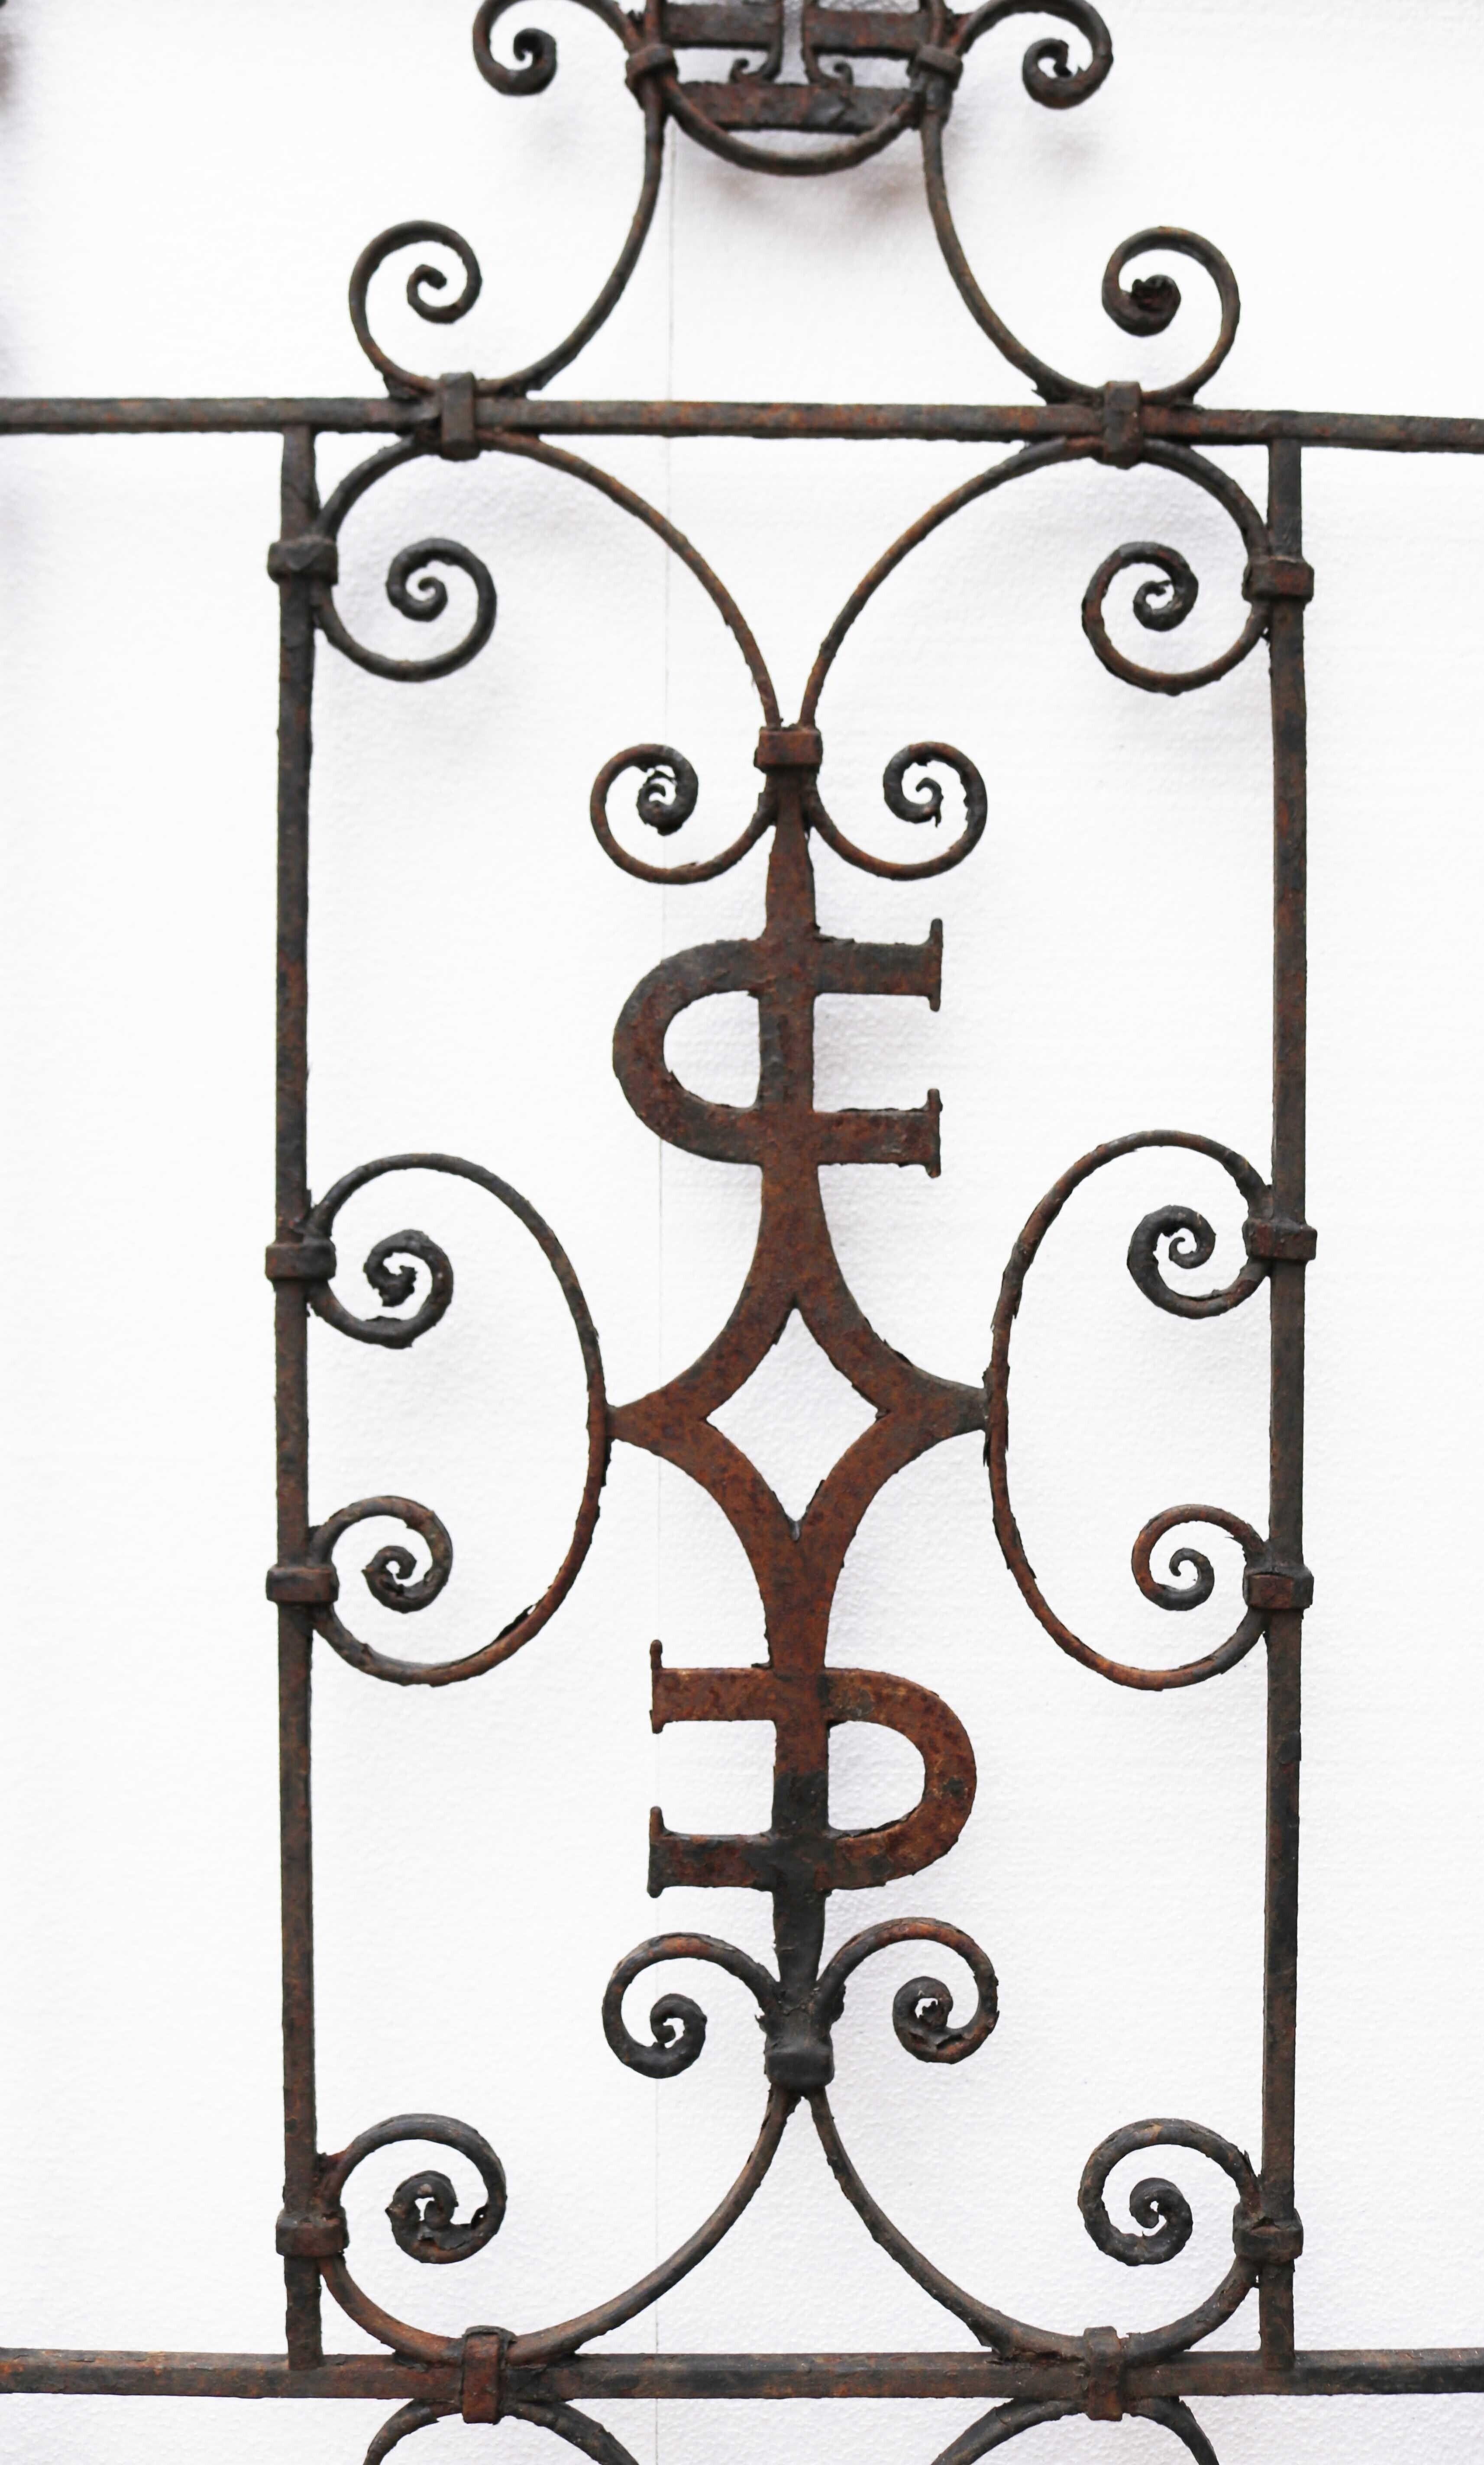 Antique Wrought Iron Garden Gate. A decorative and unusually wide gate with a beautiful scroll design.


What is wrought iron?

Wrought iron is a type of refined, low carbon iron that is smelted and worked on with tools. The term wrought iron